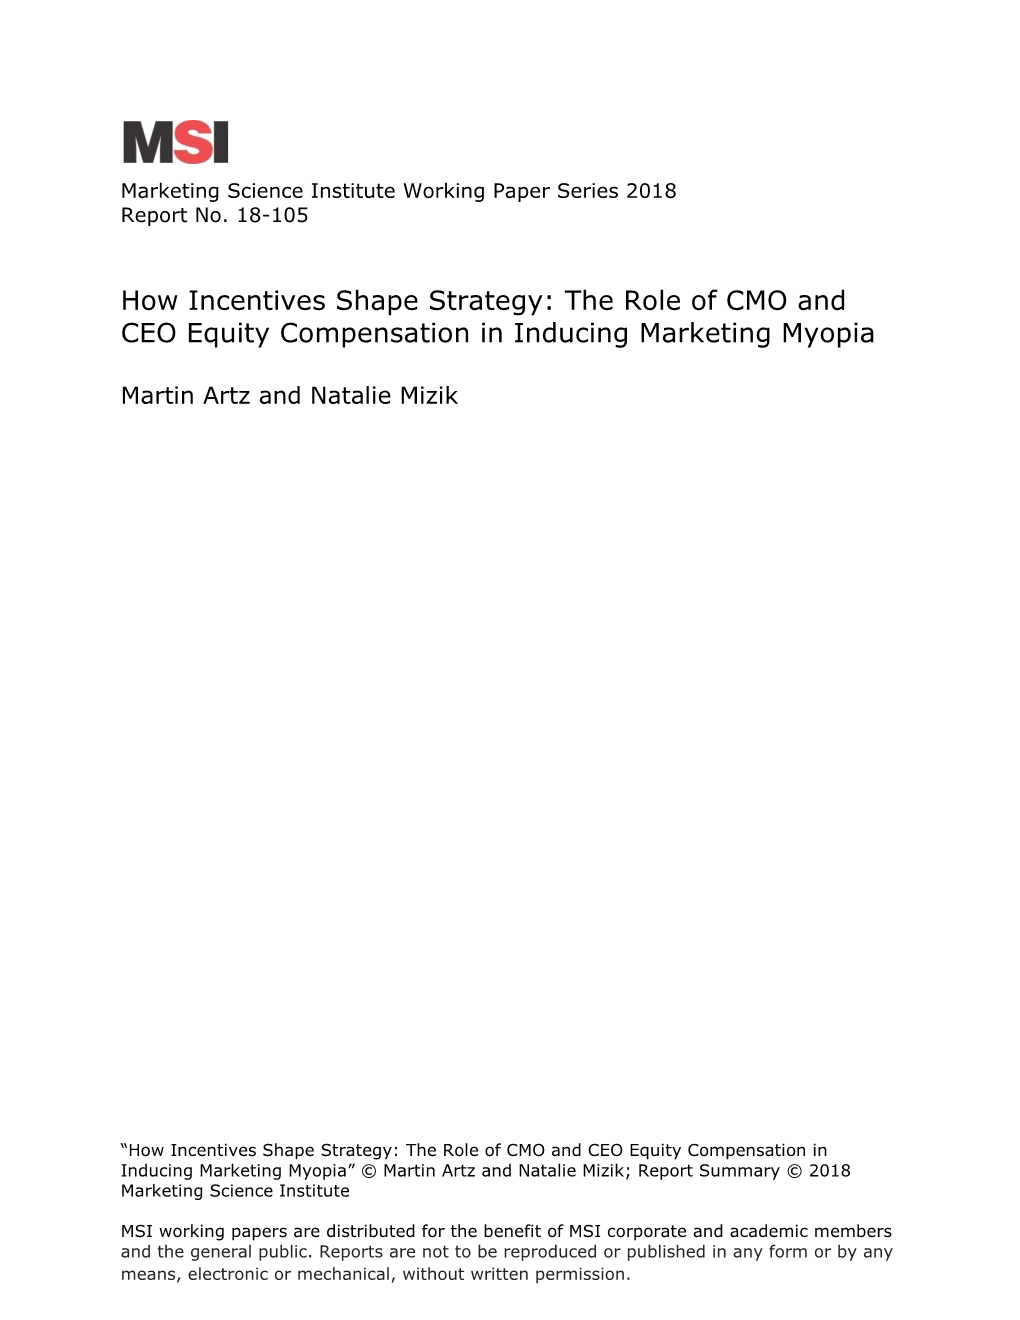 The Role of CMO and CEO Equity Compensation in Inducing Marketing Myopia